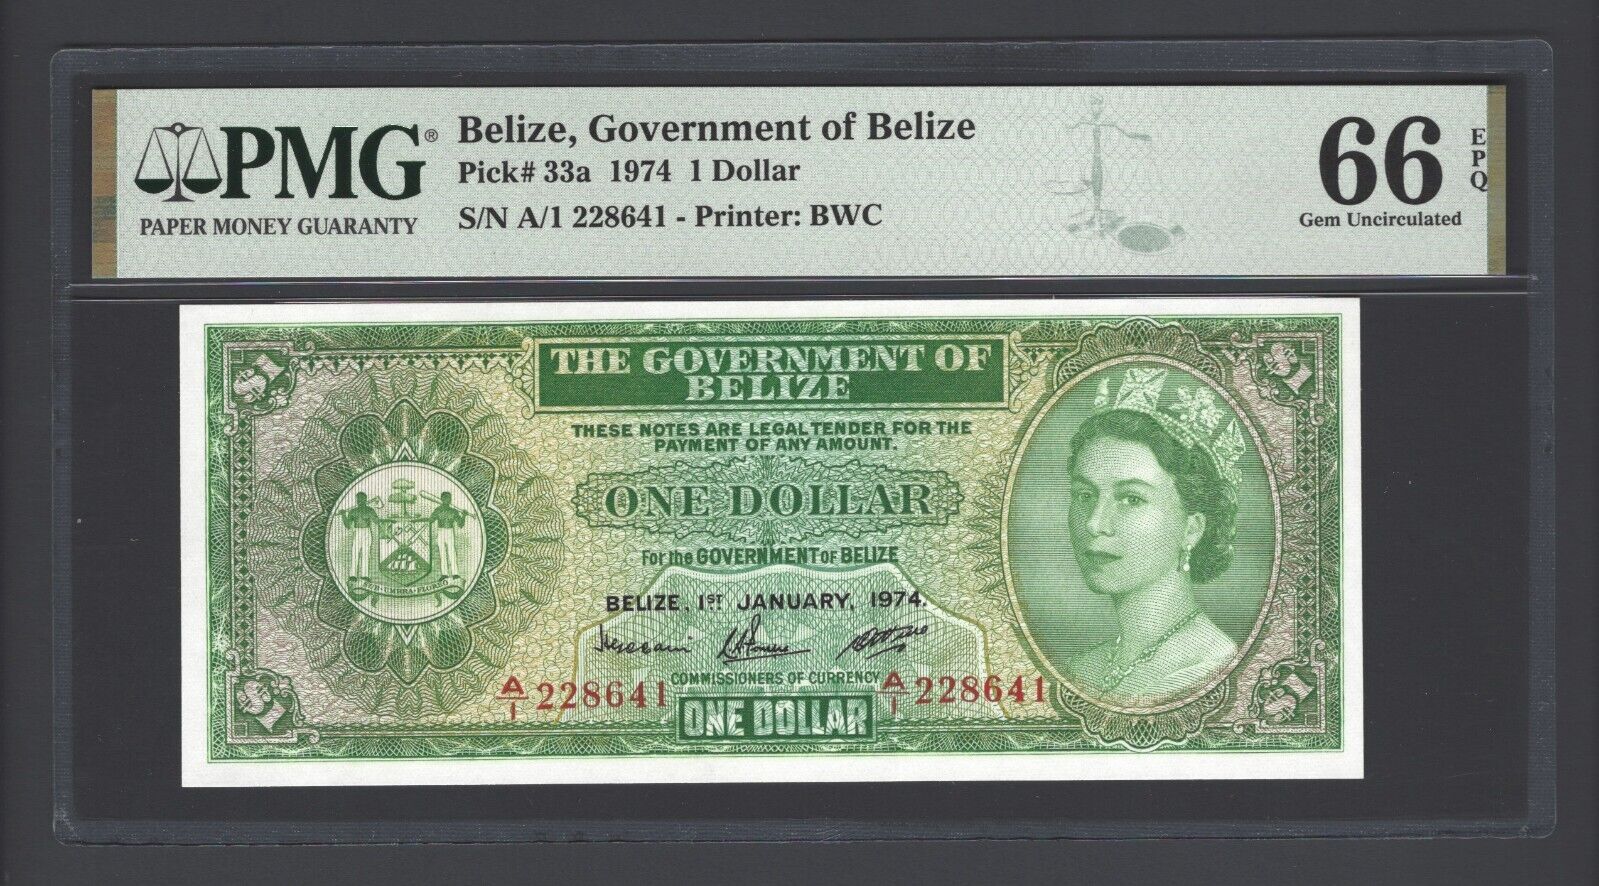 Belize One Dollar 1974 P33a Uncirculated Grade 66